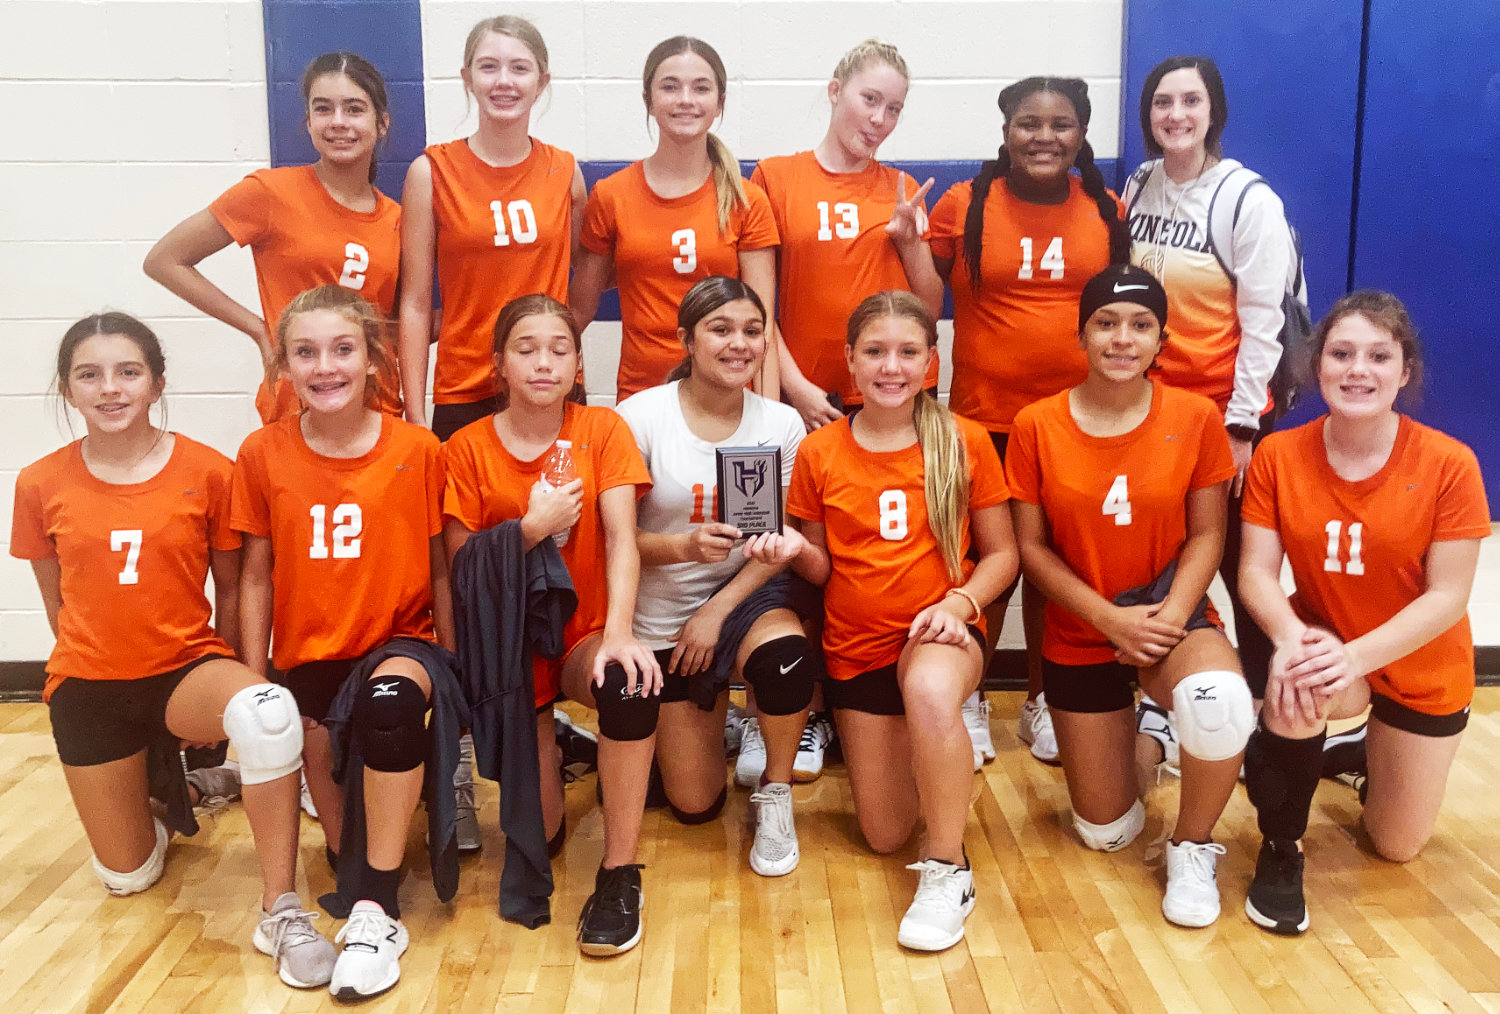 The Mineola 7th grade volleyball team includes, back from left, 2-Abby McQuilliams, 10-Journie Wilson, 3-Kali Chrietzberg, 13-Melaina Gregory, 14-Zion Olajide and Coach Slider; and, front, 7-Audrina Galaz, 12-Kaitlyn McMahon, 9-Milo Reed, 00-Skylynn Mason, 8-Jayla Johnson, 4-Ajia Simmons and 11-Brayley Cook.